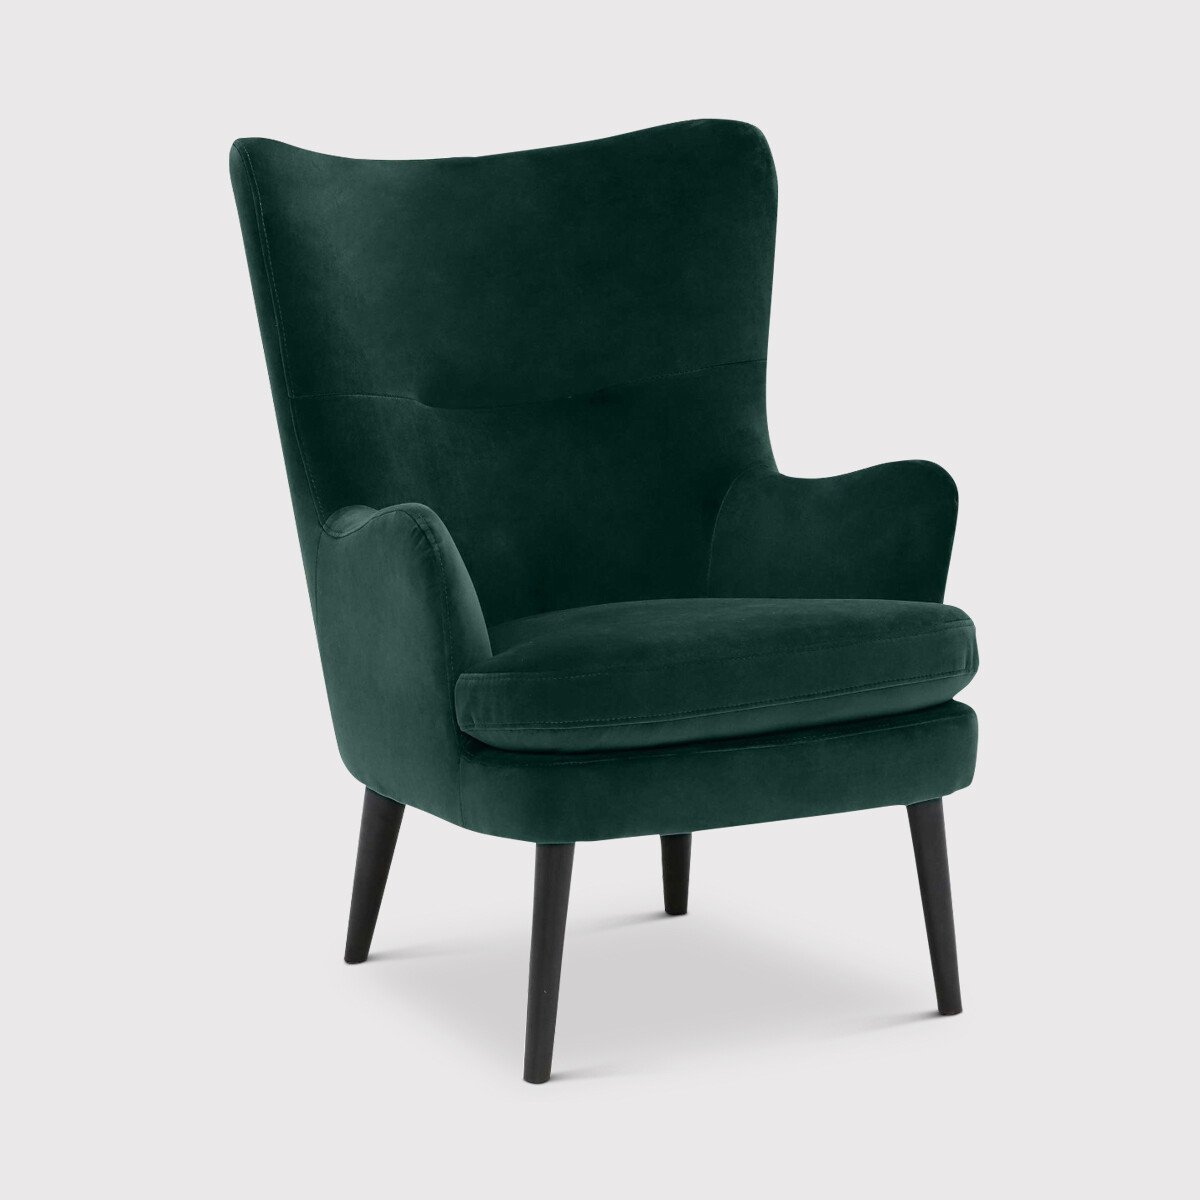 Marcy Highback Chair, Green Fabric | Barker & Stonehouse